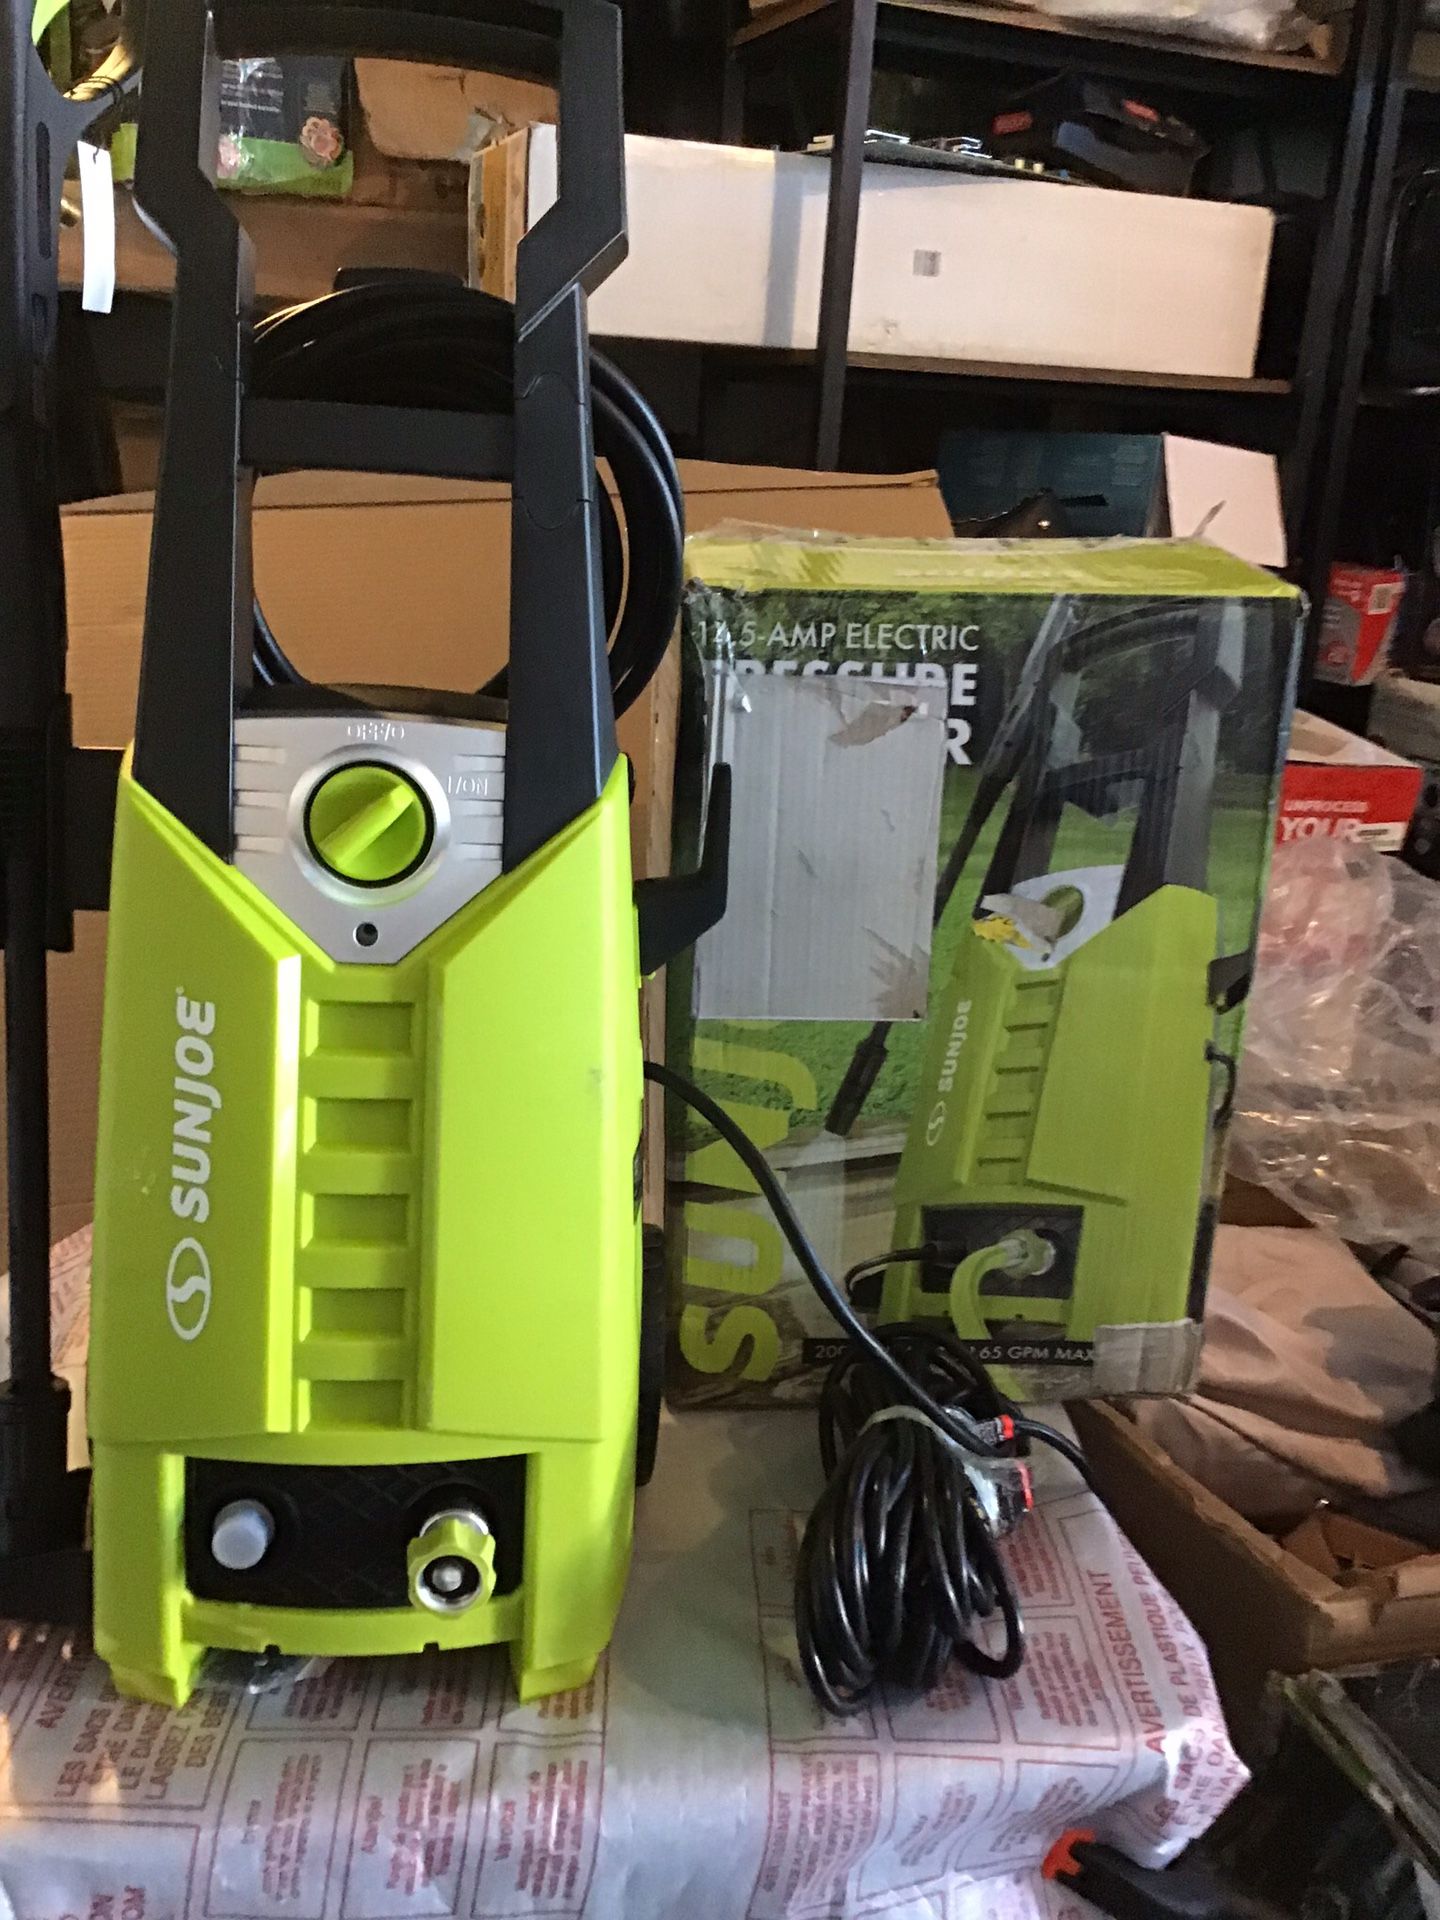 SunJoe pressure washer like new excellent condition open box complete never used complete price is firm